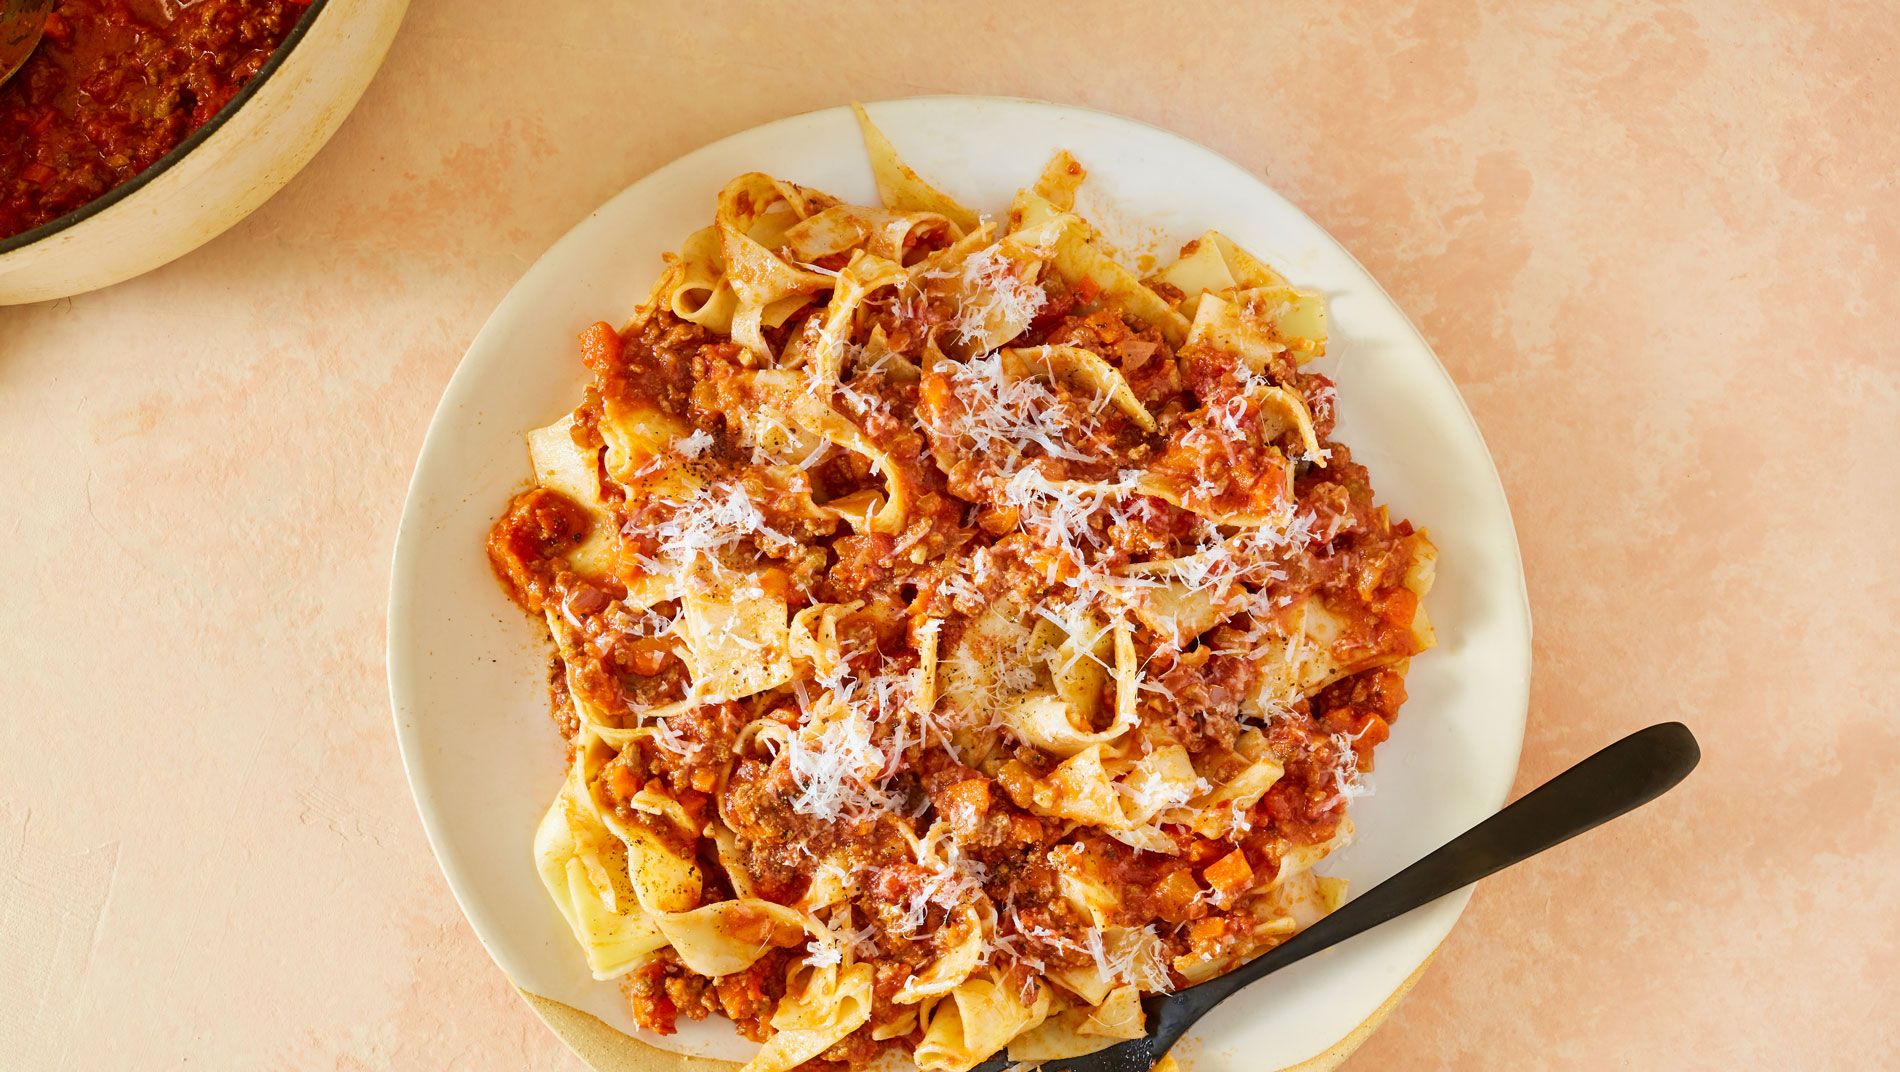 Best Pappardelle Bolognese Recipe - How To Make Pappardelle Bolognese